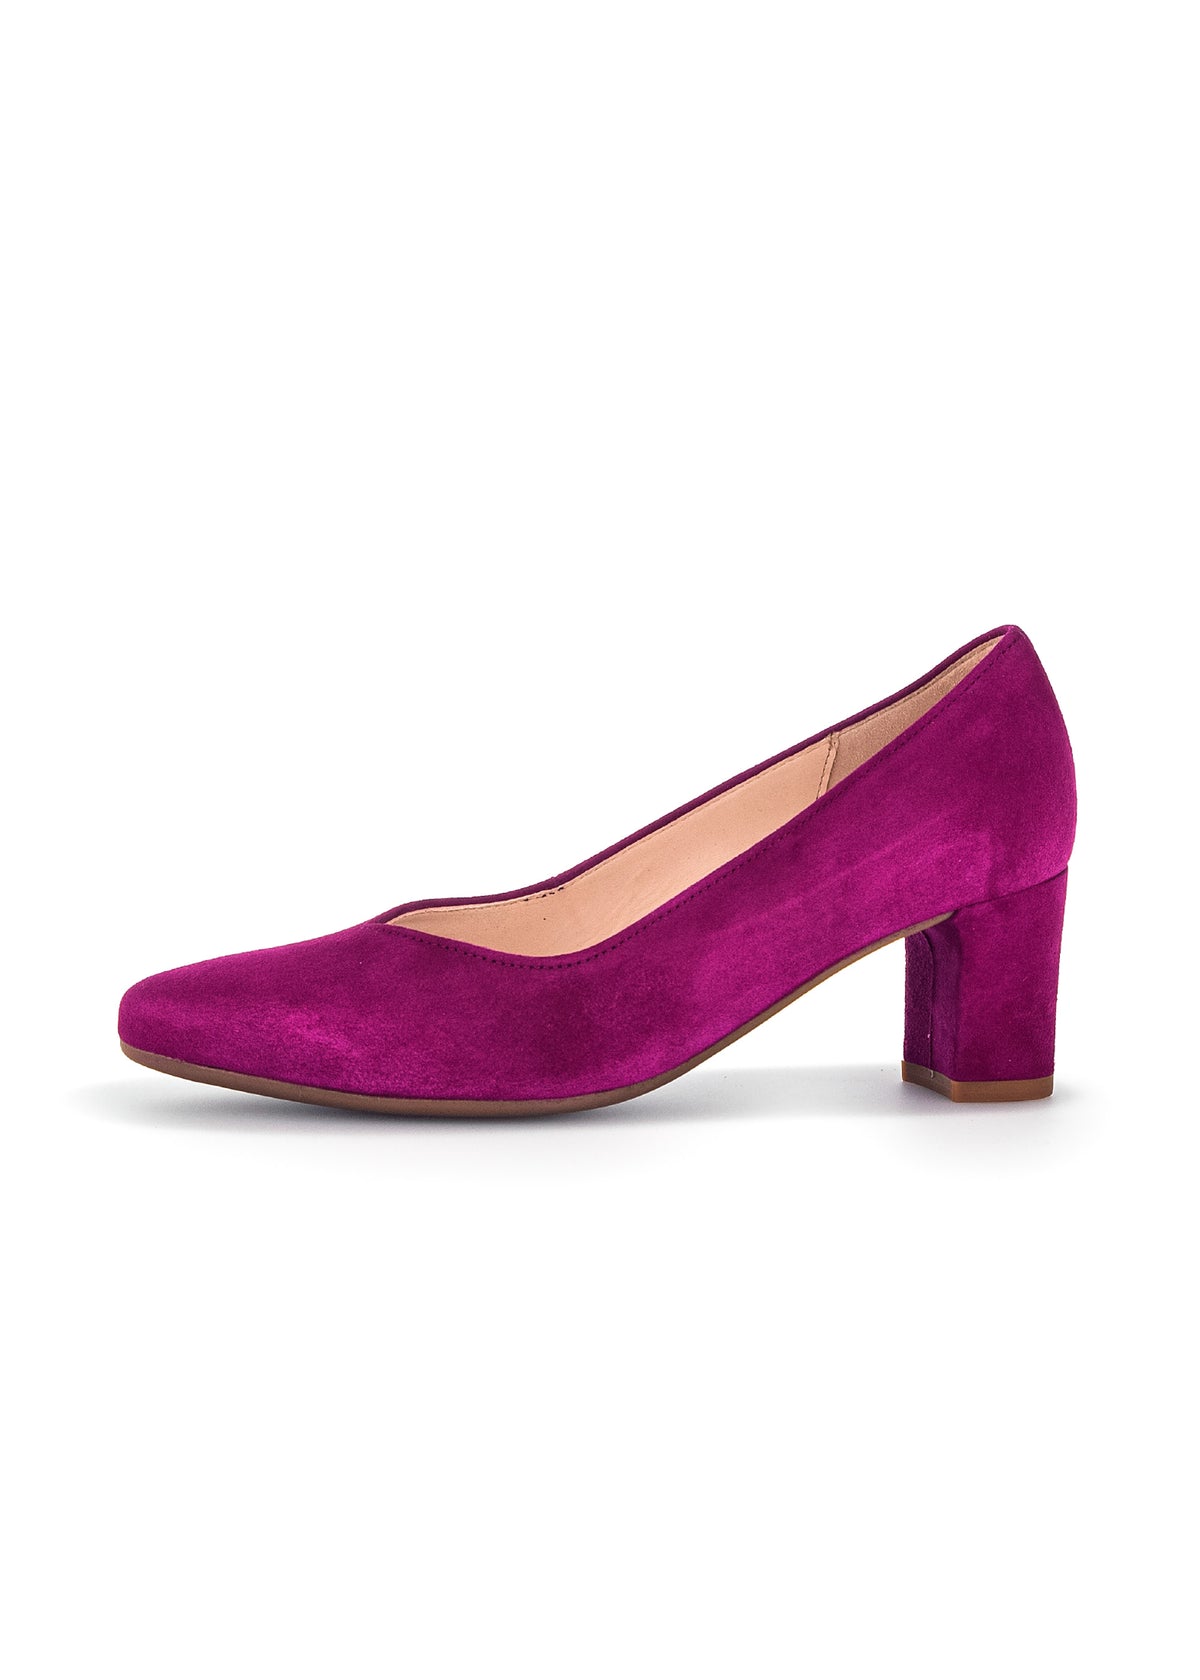 Open-toed shoes with a column skirt - purple